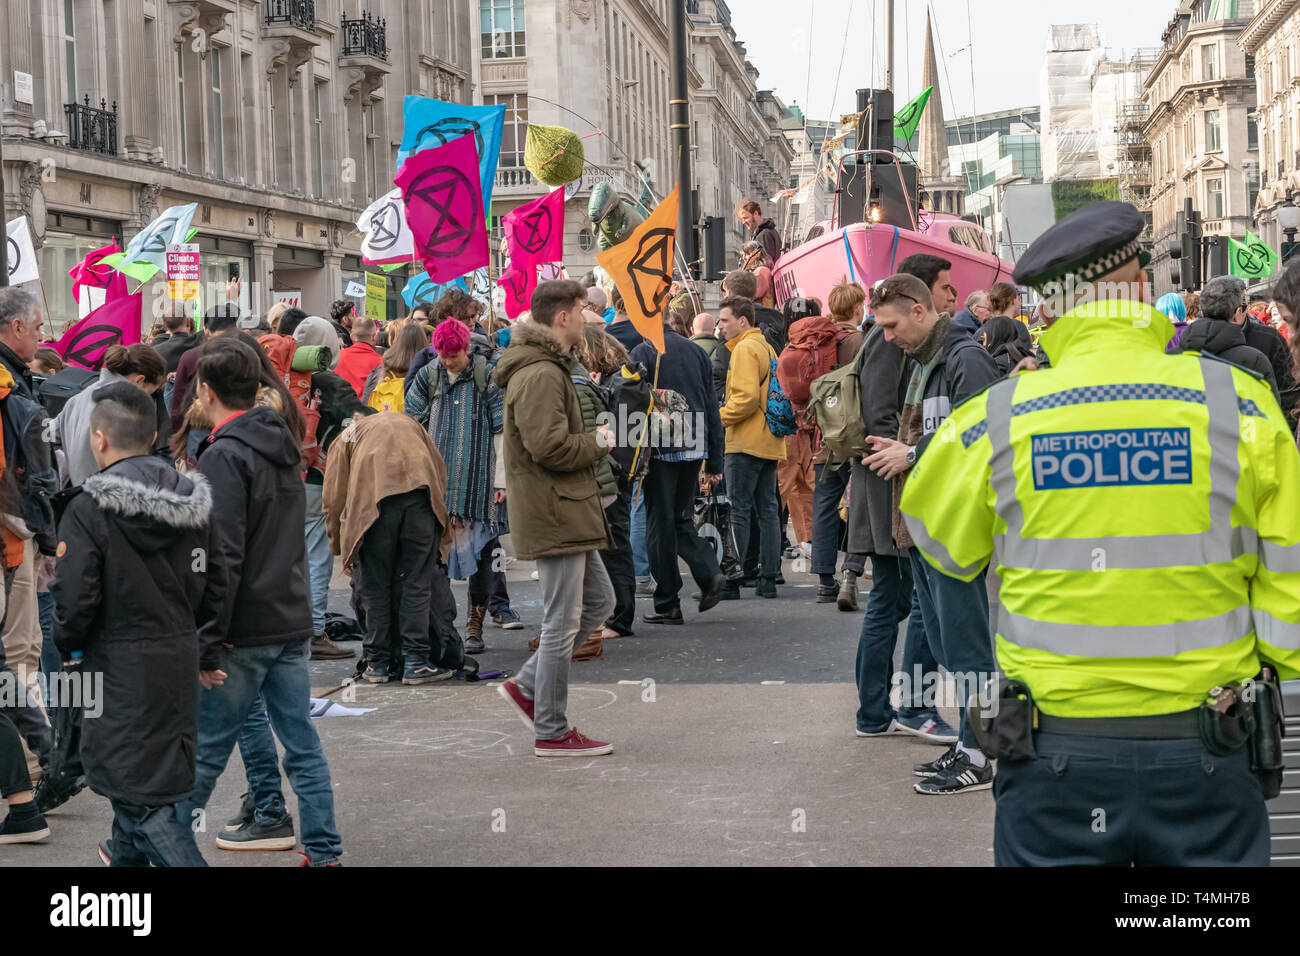 London, UK - April 15, 2019: Metropolitan Police officers patrols at Oxford street. Extinction Rebellion campaigners barricade at Oxford Circus, Stock Photo